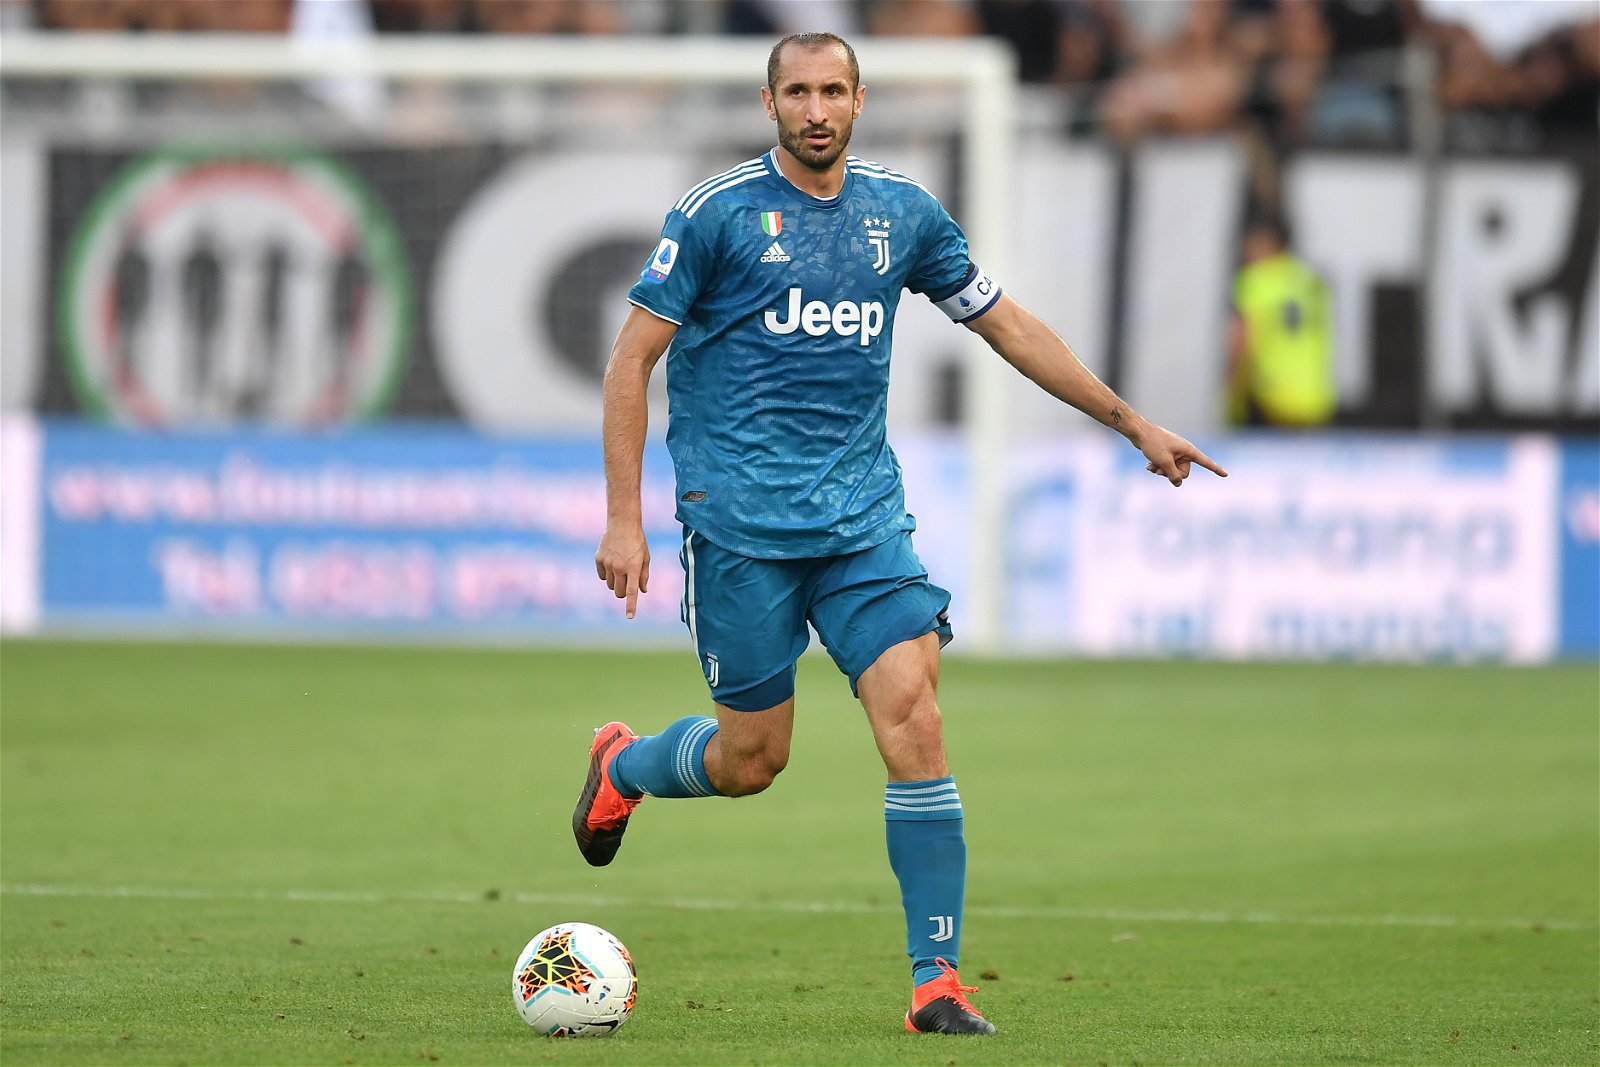 Chiellini slams Real Madrid for stealing Ballon d’Or 2018 from Cristiano Ronaldo